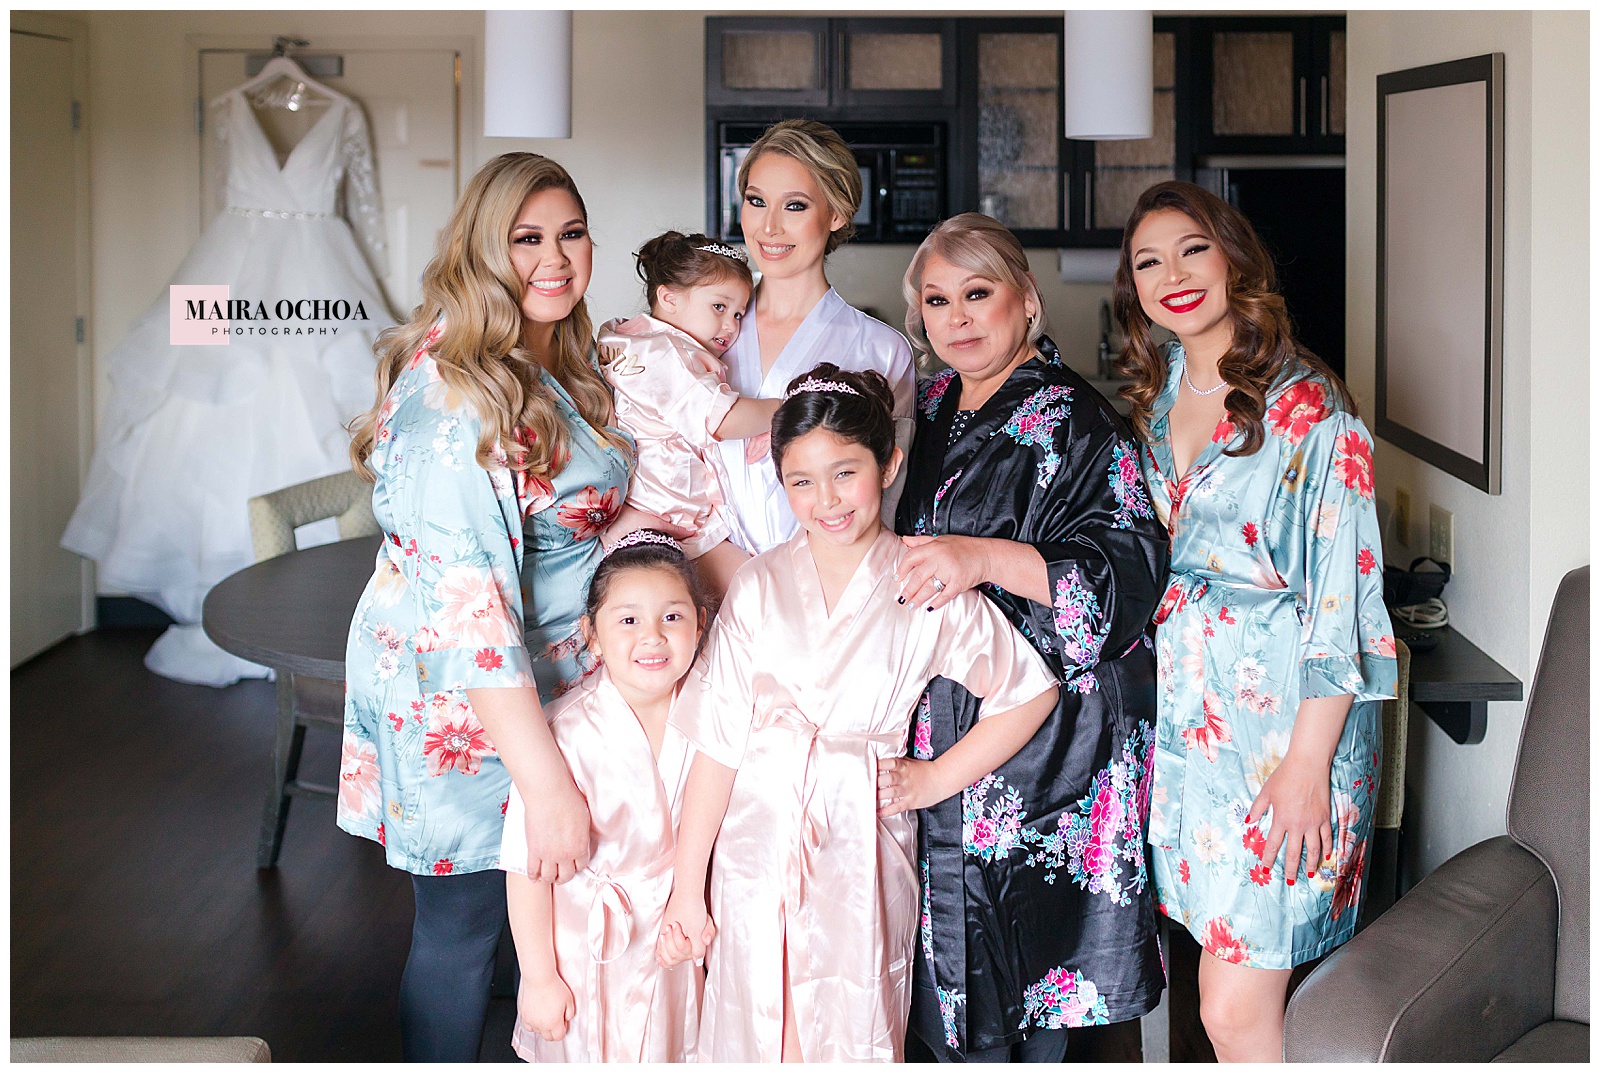 Bride getting ready makeup Sonesta Simply Suites Chicago Waukegan, Bridal Party Bed photo with cute wedding robes, flower bridesmaids robes